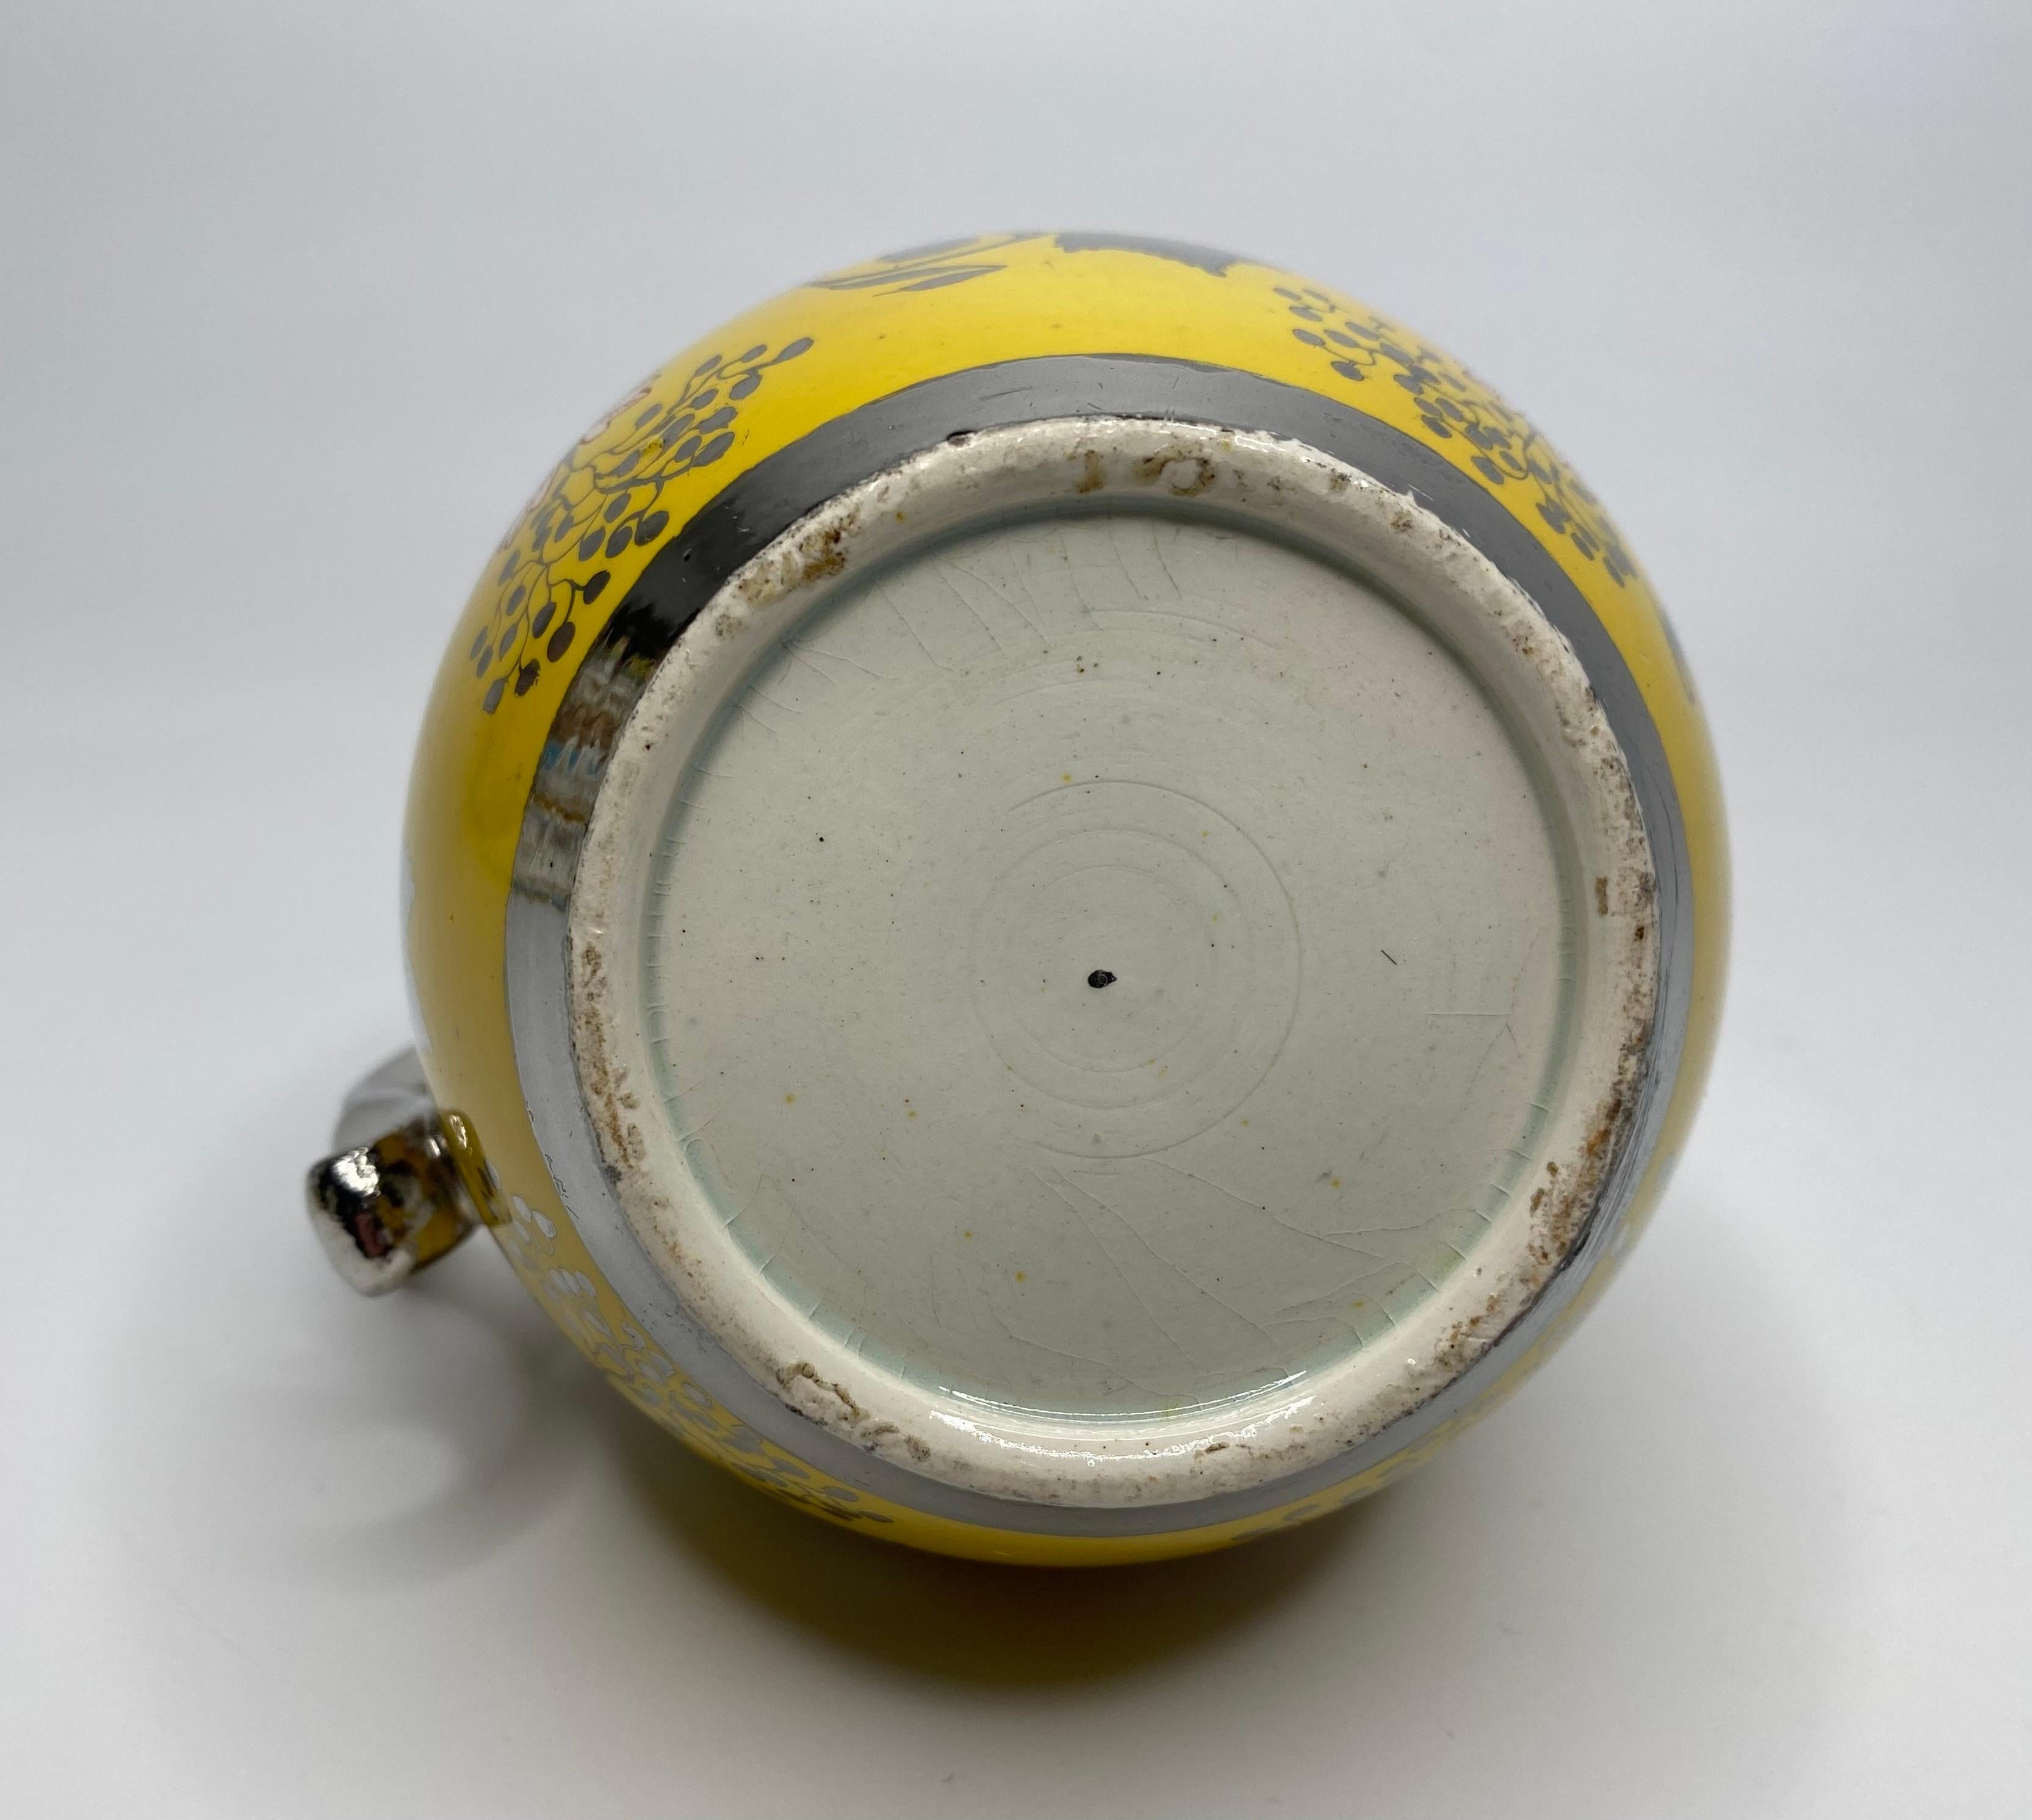 English pottery ‘Canary Yellow’ silver lustre jug, c. 1820. 2